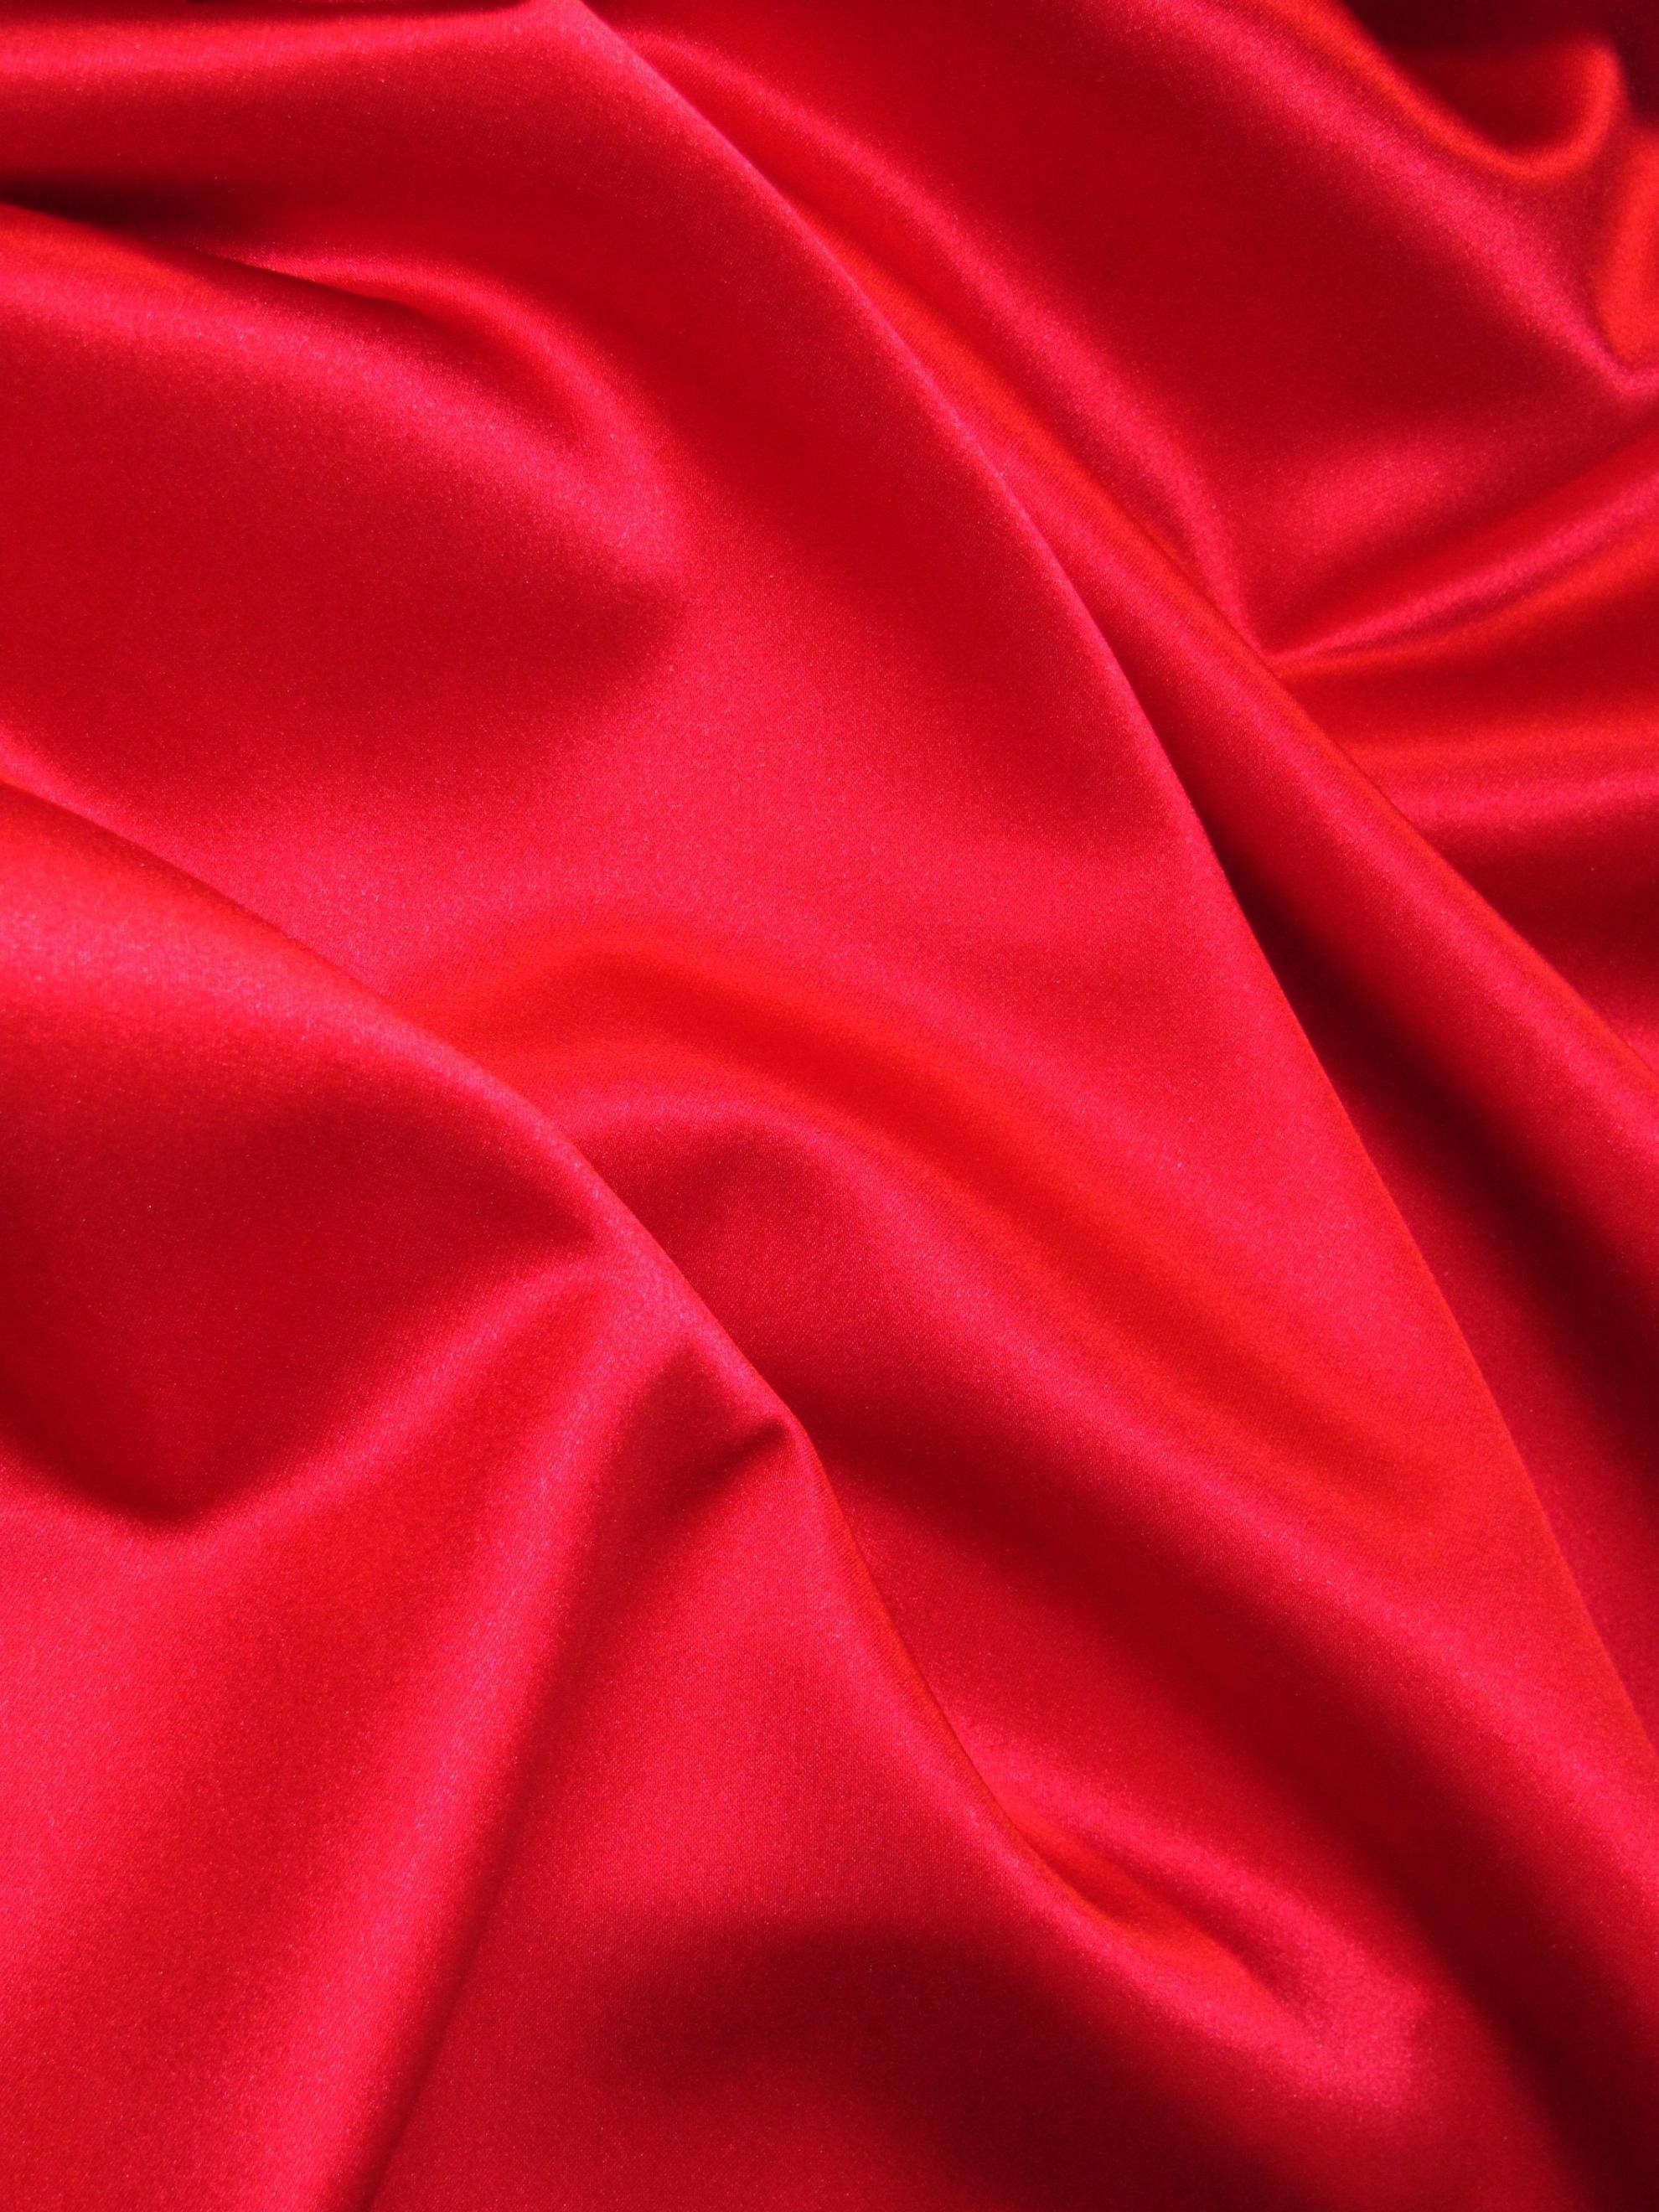 Red satin wallpaper, Elegant design, High-resolution pictures, Classic, 1980x2640 HD Handy